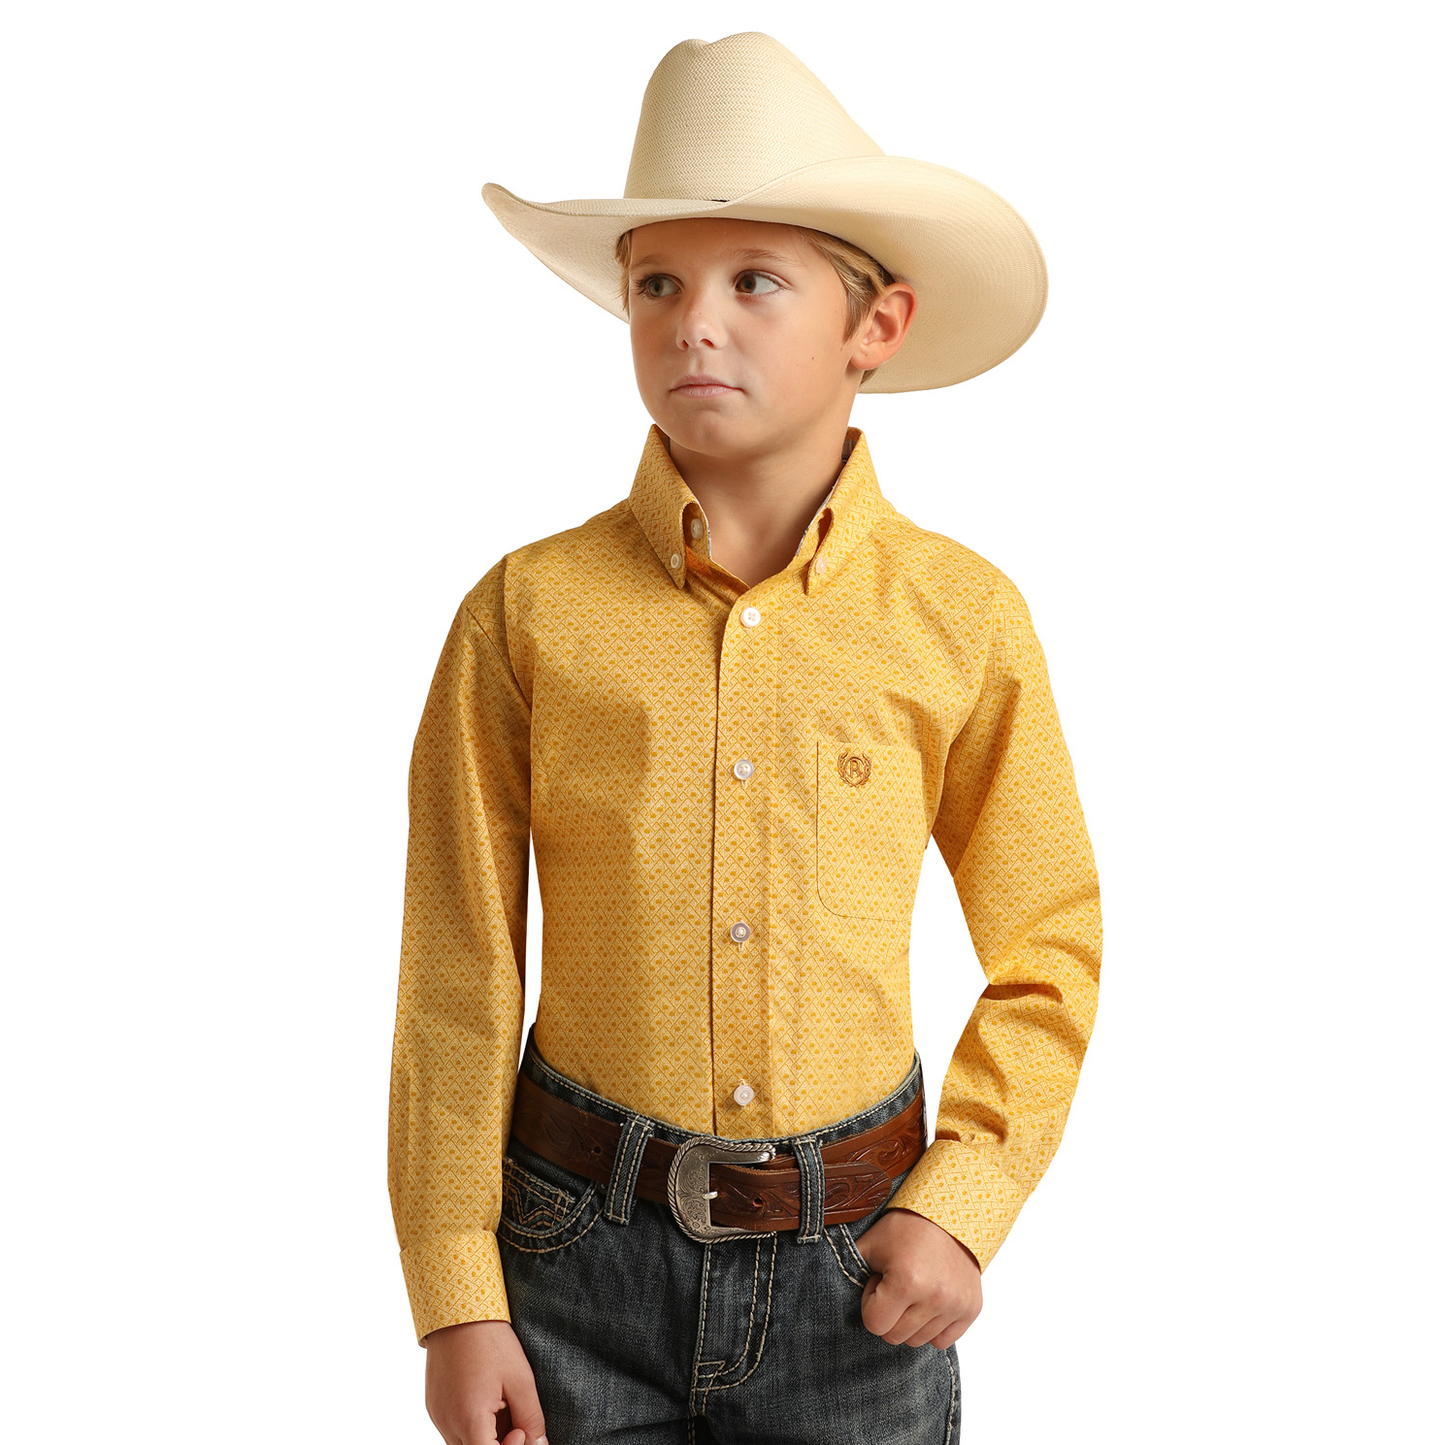 Panhandle Select® Youth Boy's Yellow Printed Button Down Shirt PSBSODRZ6I-76